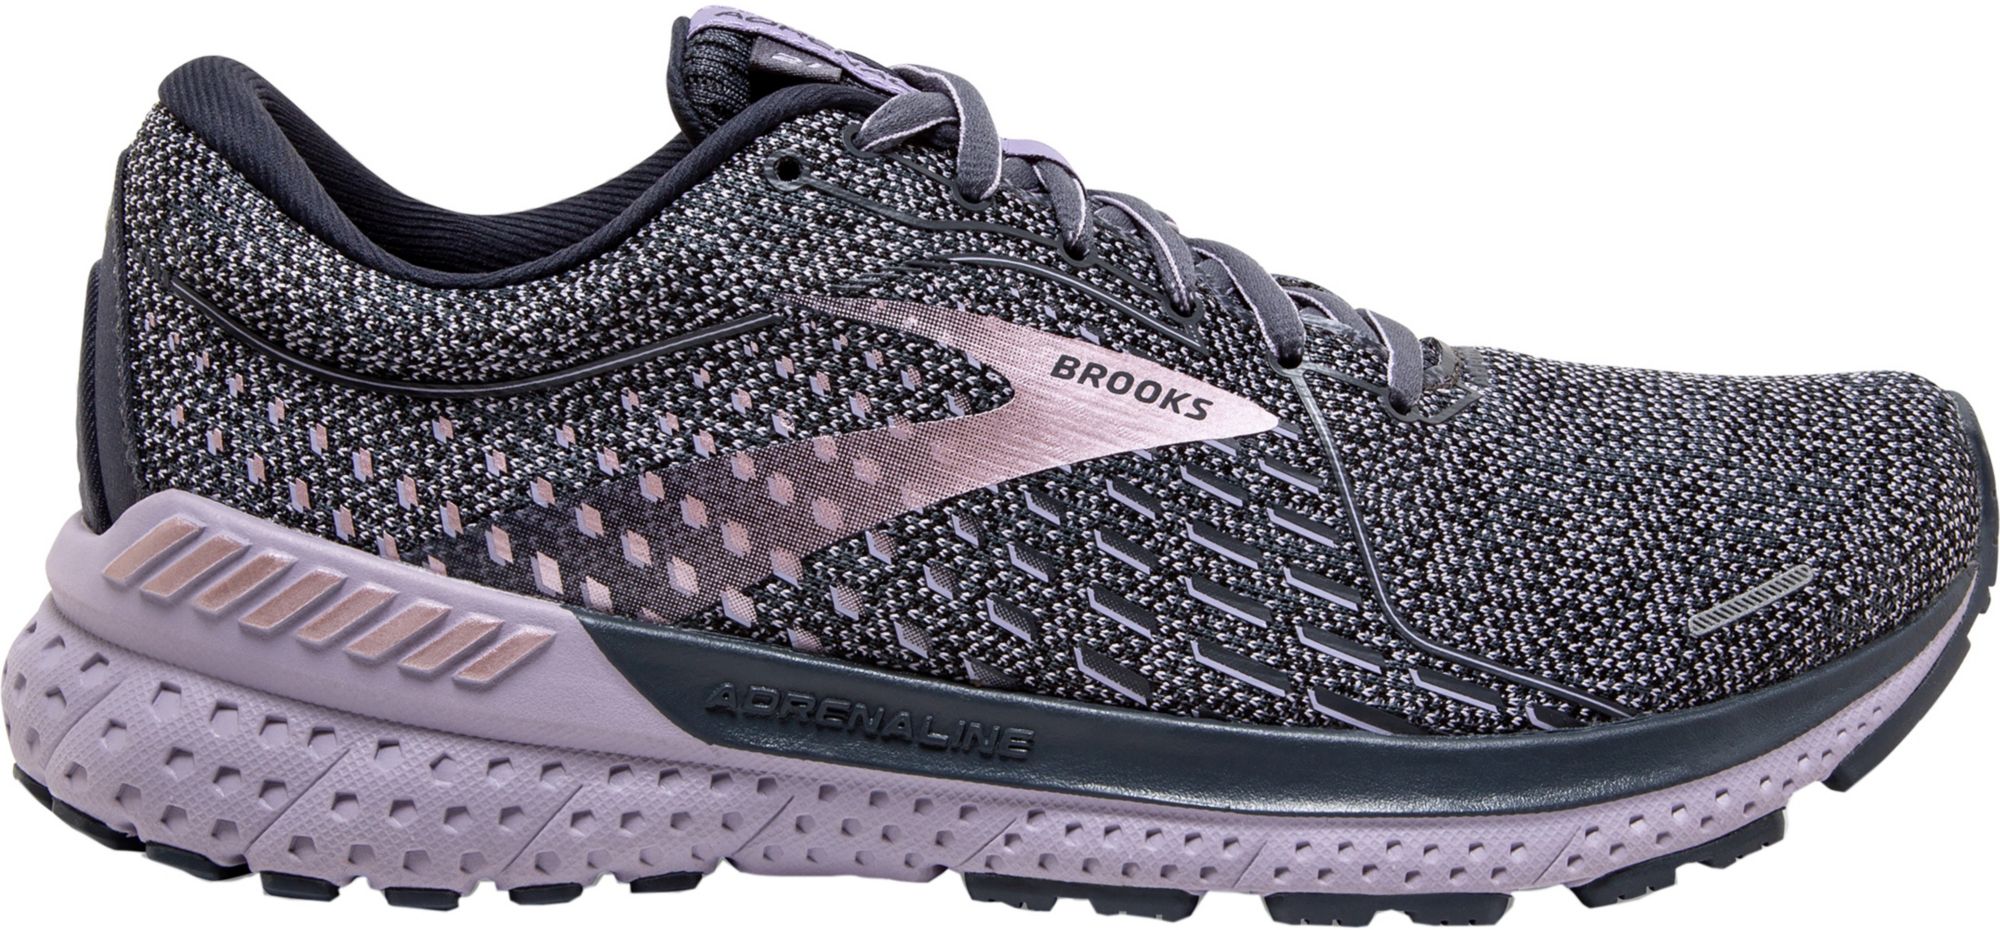 Women's Brooks Athletic Shoes | DICK'S 